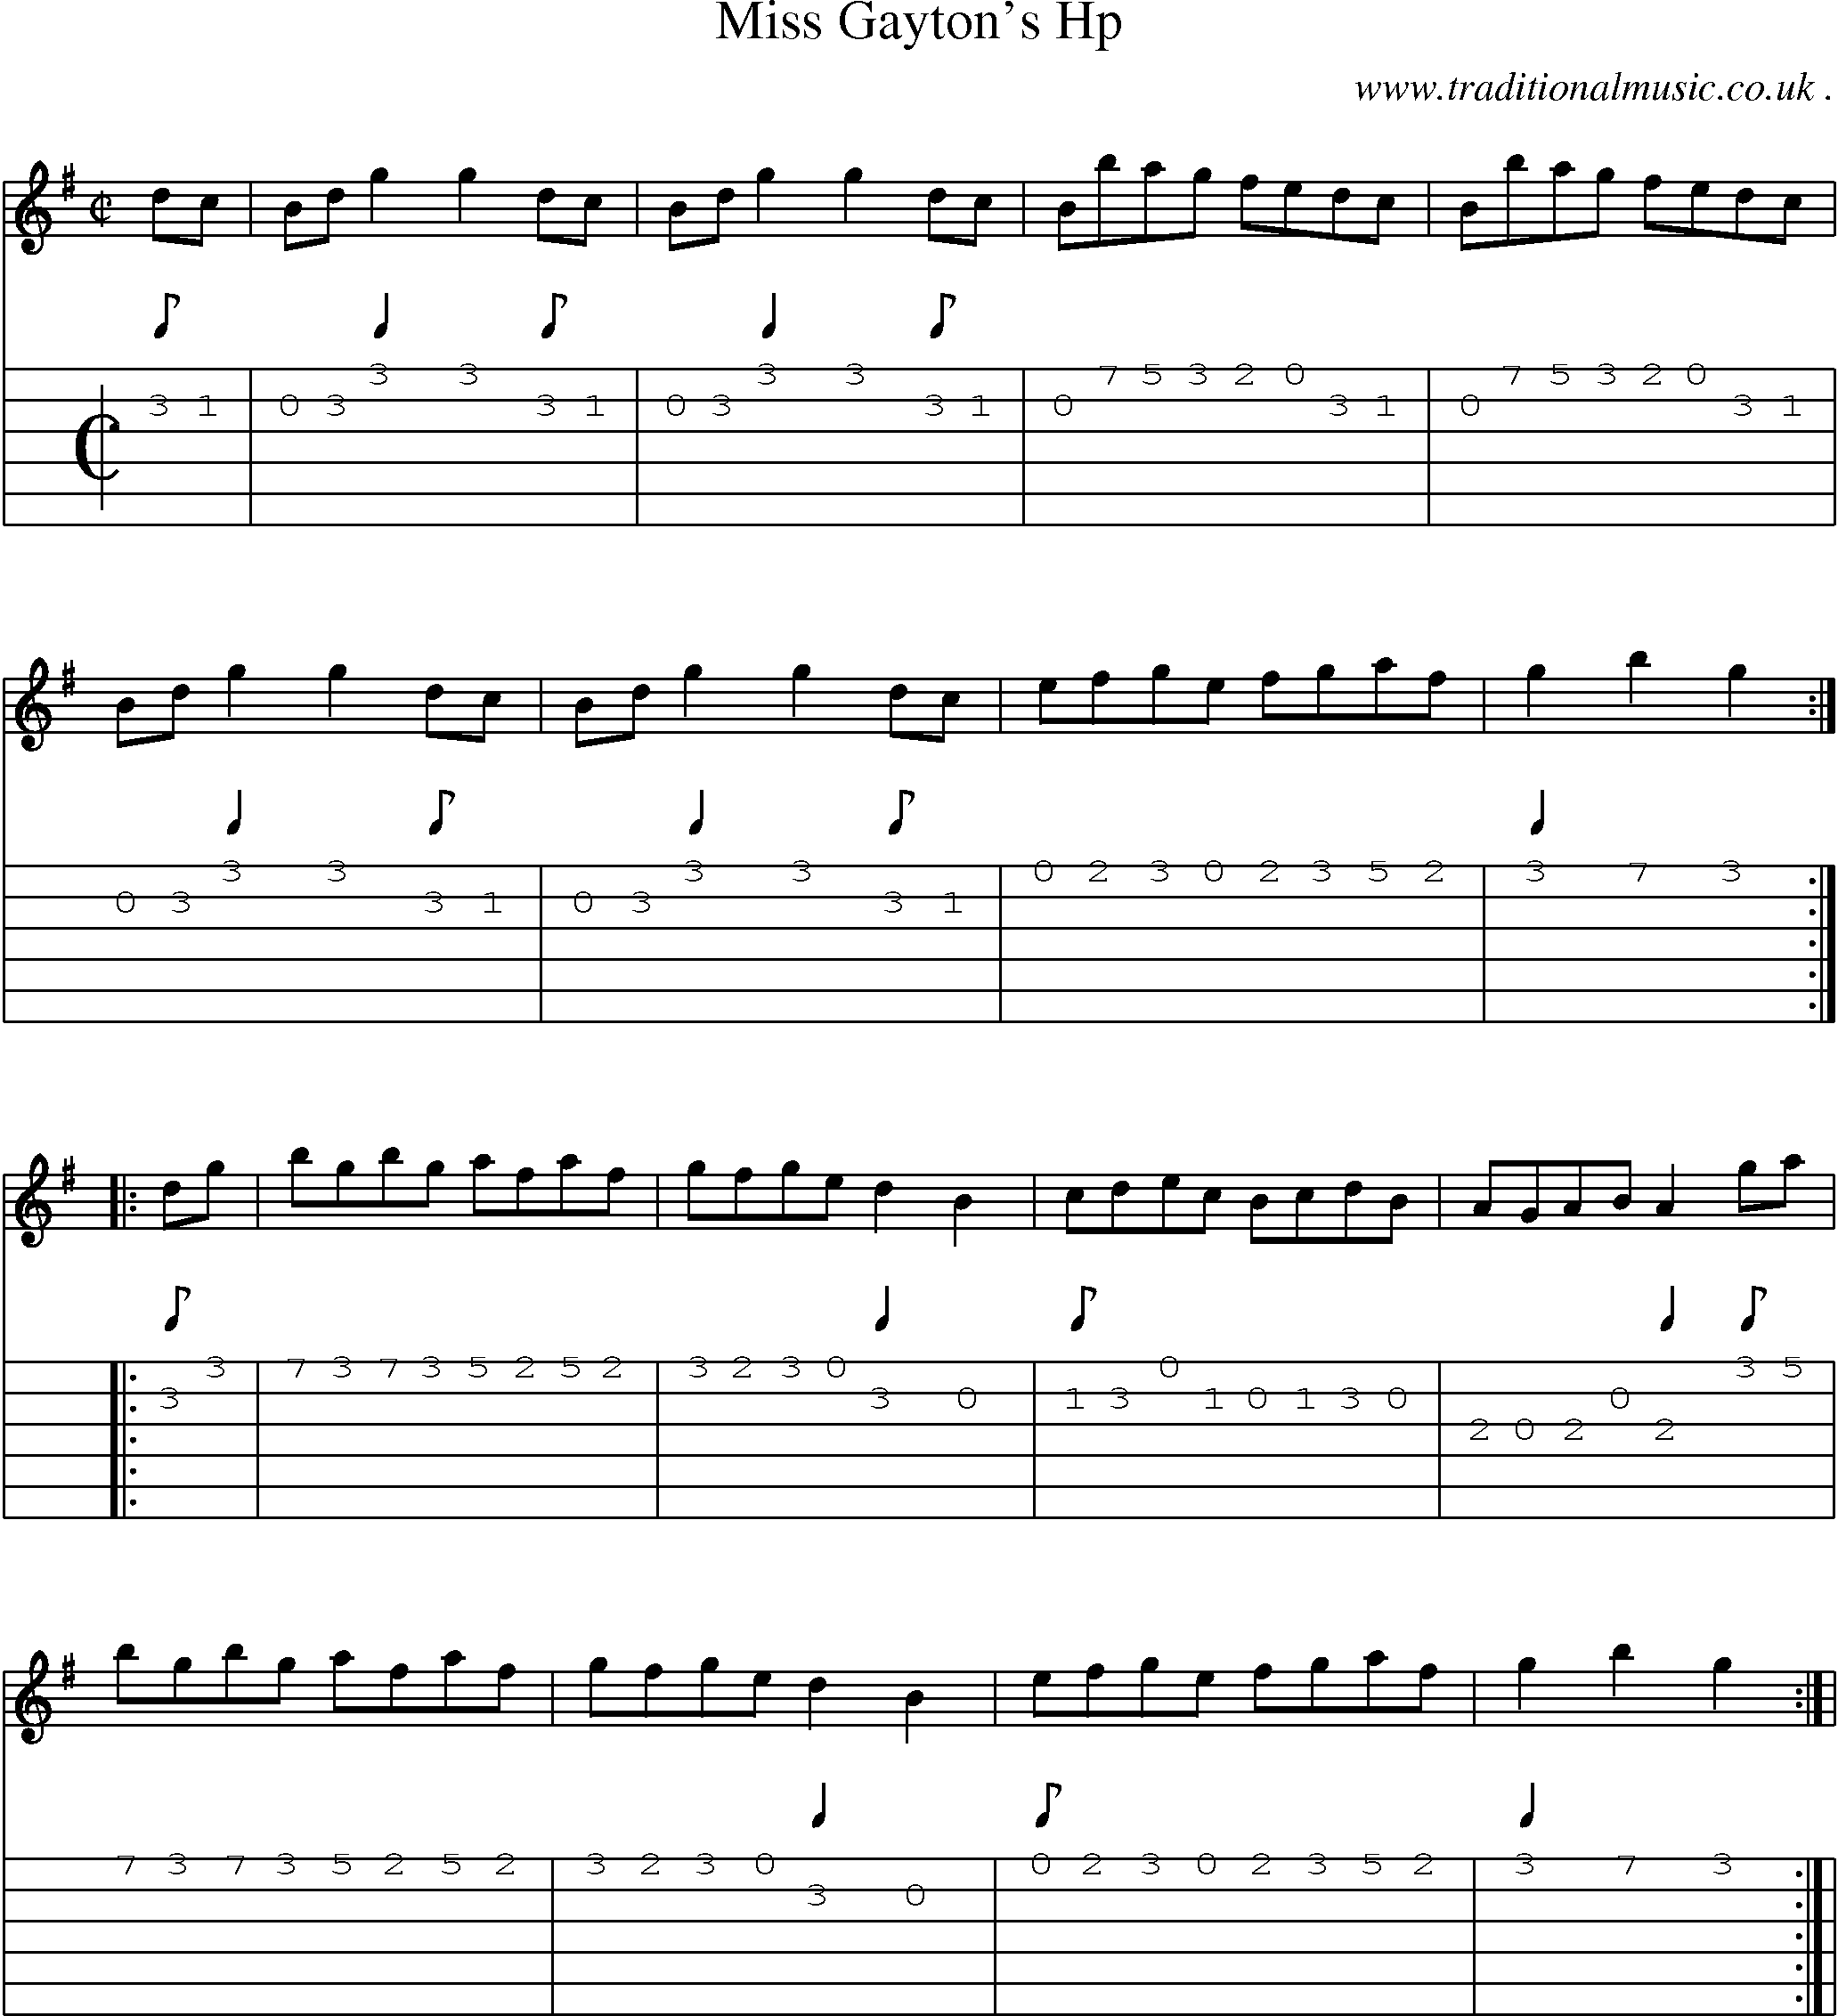 Sheet-Music and Guitar Tabs for Miss Gaytons Hp